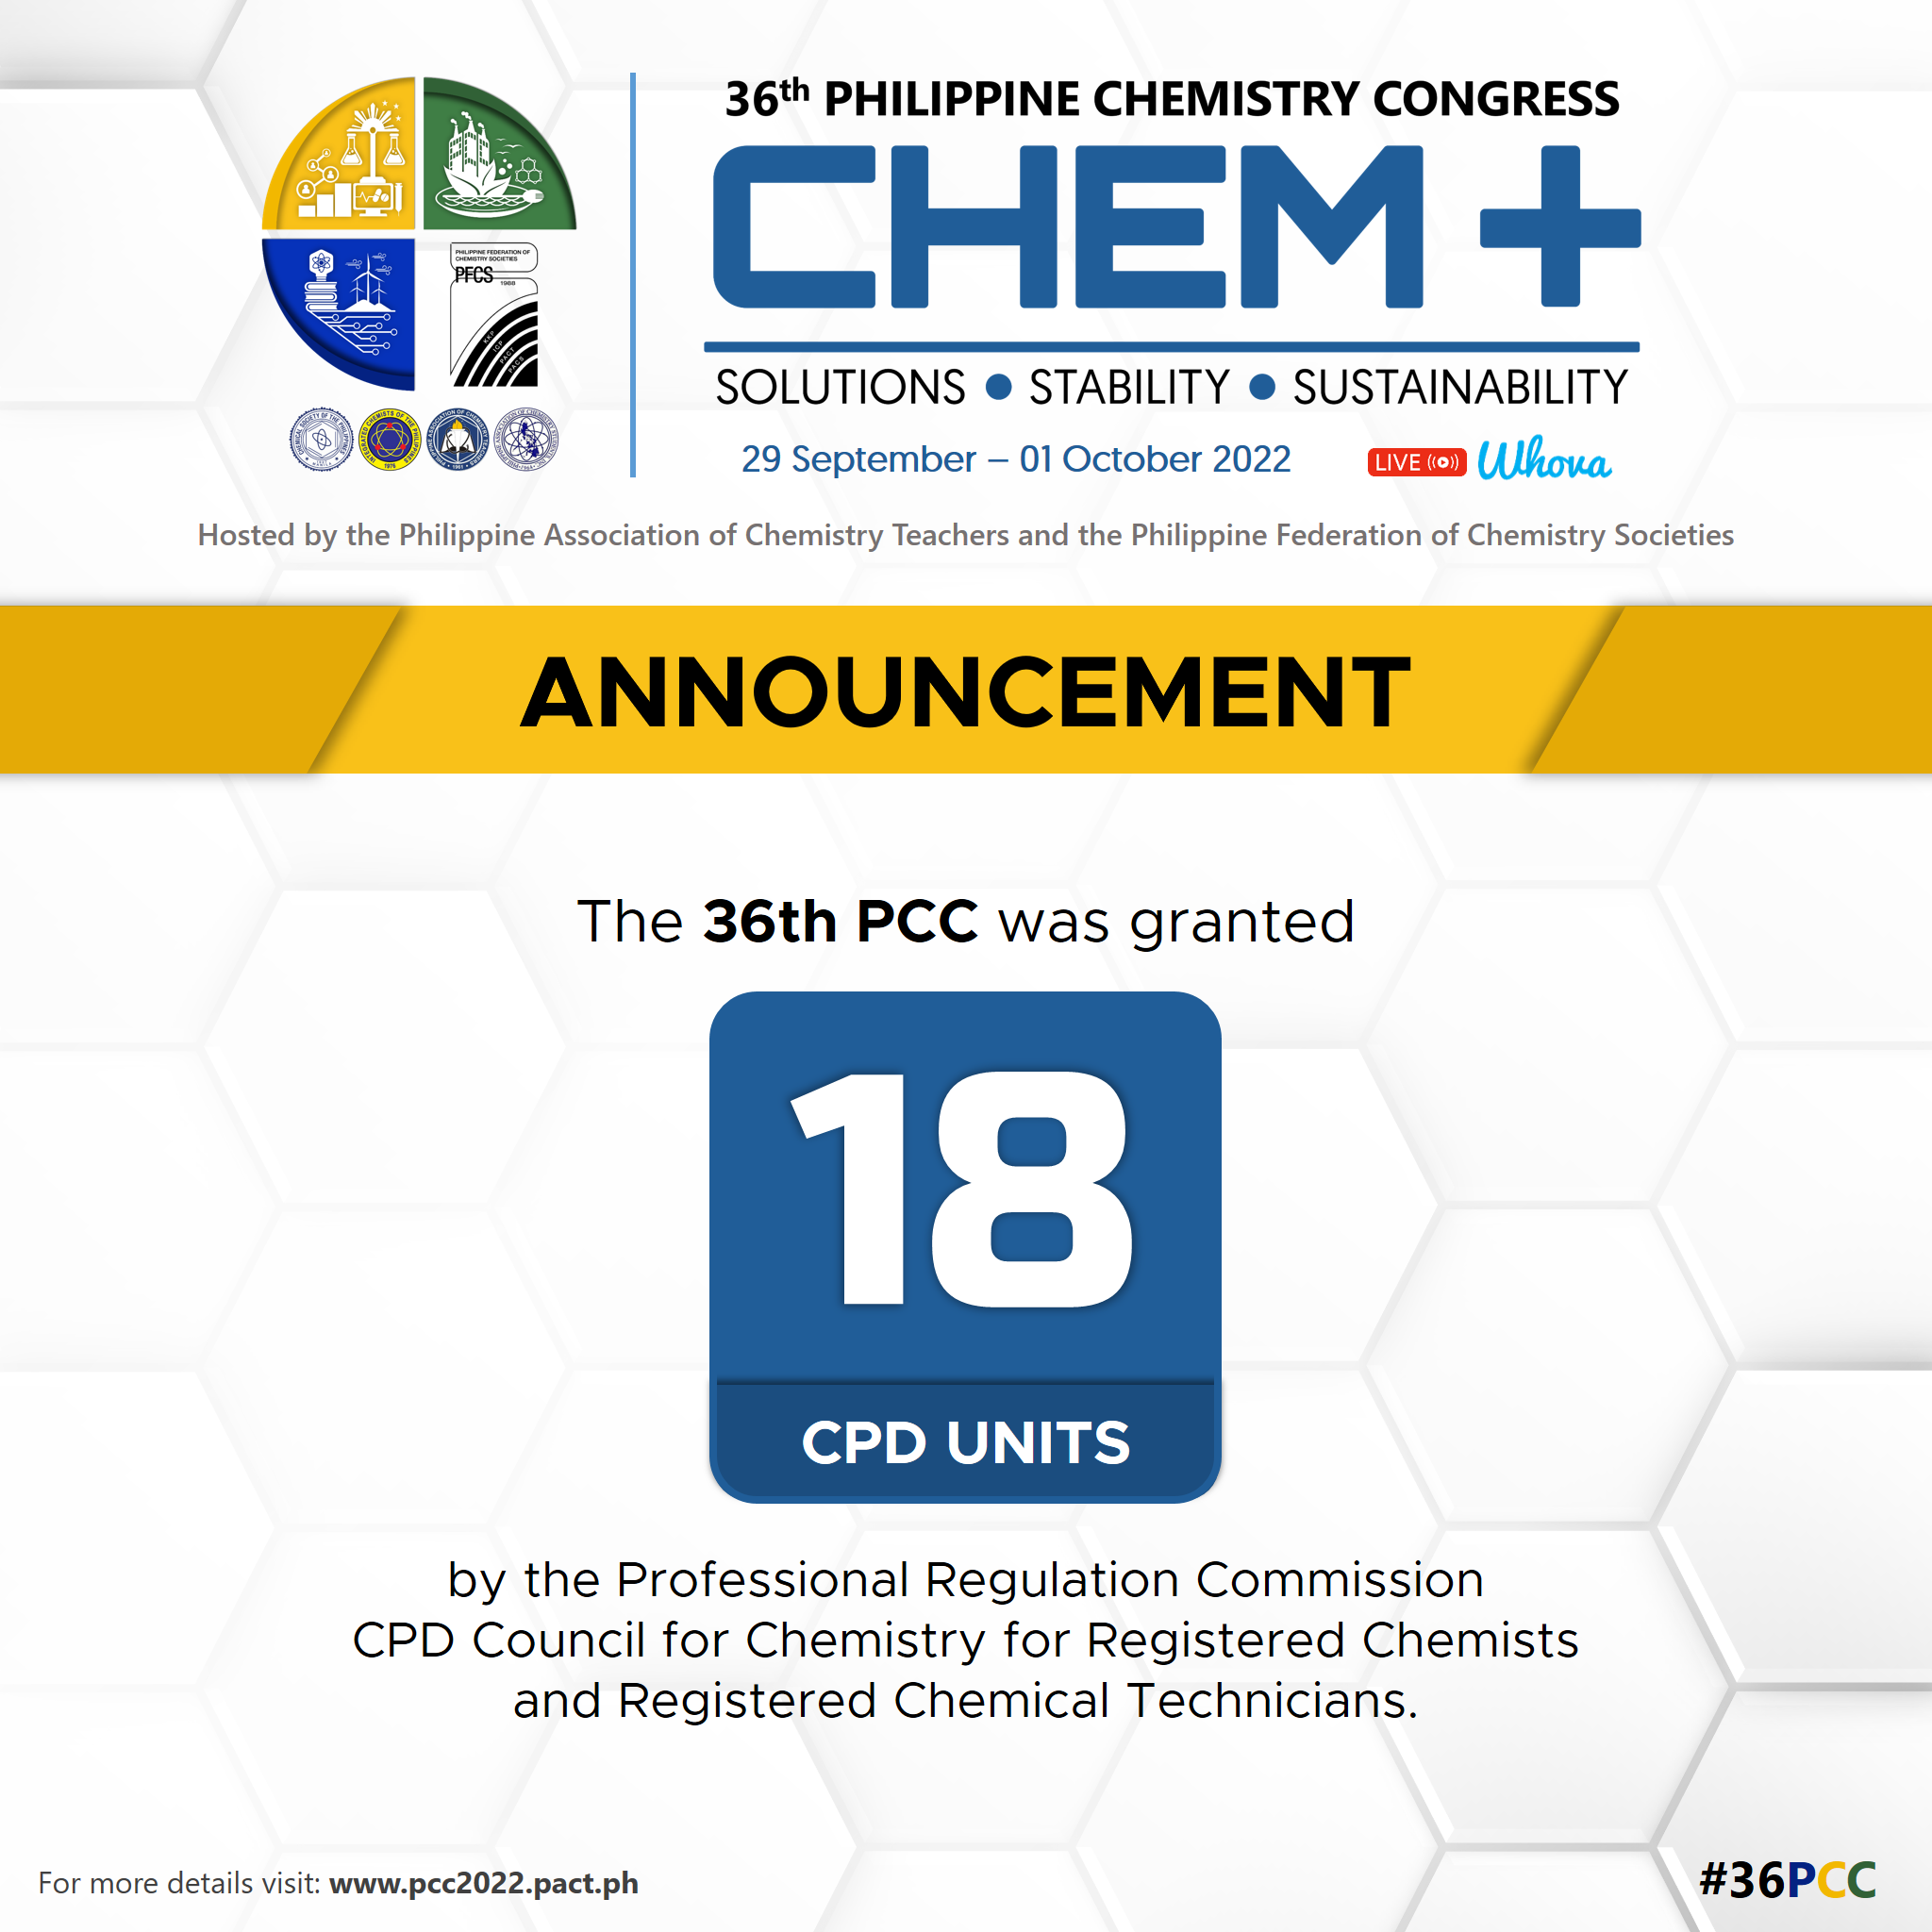 Voltaire Organo on LinkedIn: Register now for the 36th Philippine Chemistry  Congress!